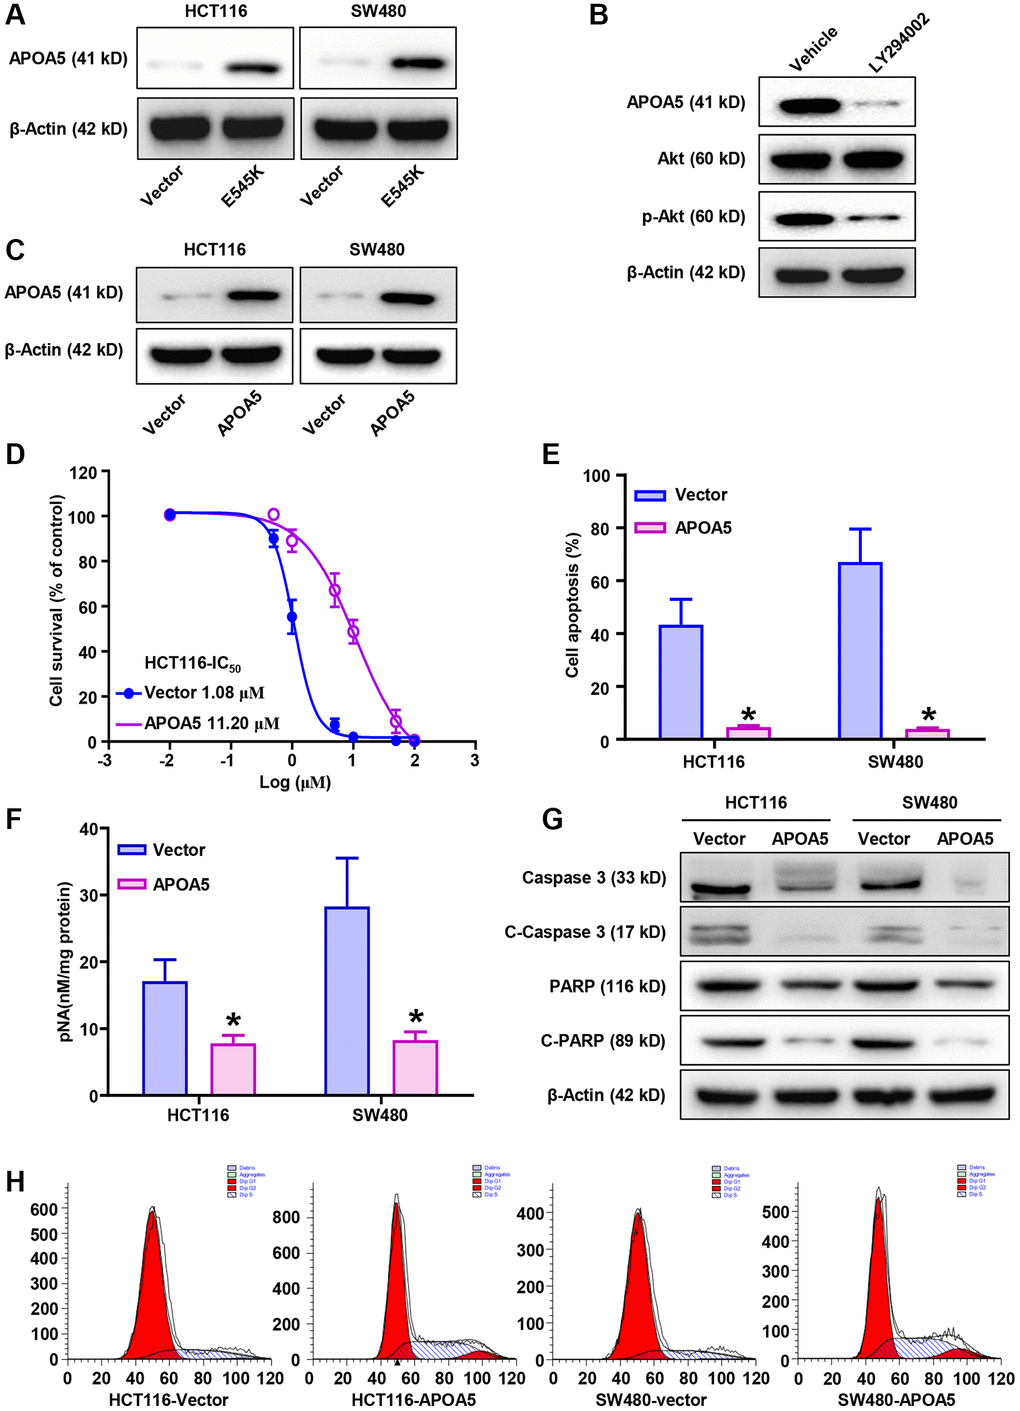 PIK3CA-E545K induced L-OHP resistance is mediated by the modulation of APOA5. (A) Western blot analysis was performed to evaluate the expression levels of APOA5 in PIK3CA-E545K infected HCT116 and SW480 cells. (B) After treatment with inhibitor LY294002, Western blot analysis was performed to evaluate the expression of APOA5 in PIK3CA-E545K infected HCT116 cells. (C) Ectopic APOA5 expression was conformed in HCT116 and SW480 cells with Western blot assays. (D) The IC50 of control and HCT116/APOA5 cells were analyzed with cell viability with gradient L-OHP treatment. The IC50 were 11.20 μM and 1.08 μM, respectively. (E) Flow cytometry was performed to determine cell apoptosis of APOA5 overexpressed HCT116 and SW480 cells which were treated with L-OHP (1 μM). (F) Caspase 3 activity was measured by pNA concentrations in APOA5 overexpressing cells with L-OHP (2 μM) treatment. (G) Western blotting was performed to detect caspase 3, cleaved caspase-3 (C-Caspase 3), full-length PARP and cleaved PARP (C-PARP) in APOA5 overexpressing cells after L-OHP treatment. β-actin was used as a loading control. (H) Cell cycle distribution in APOA5 overexpressed HCT116 and SW480 cells with L-OHP treatment (2 μM for 48 h). The proportion of cells in cell cycle phases was measured by flow cytometry and quantified by FlowJo software. Results are representative of at least three independent experiments. p-values *.